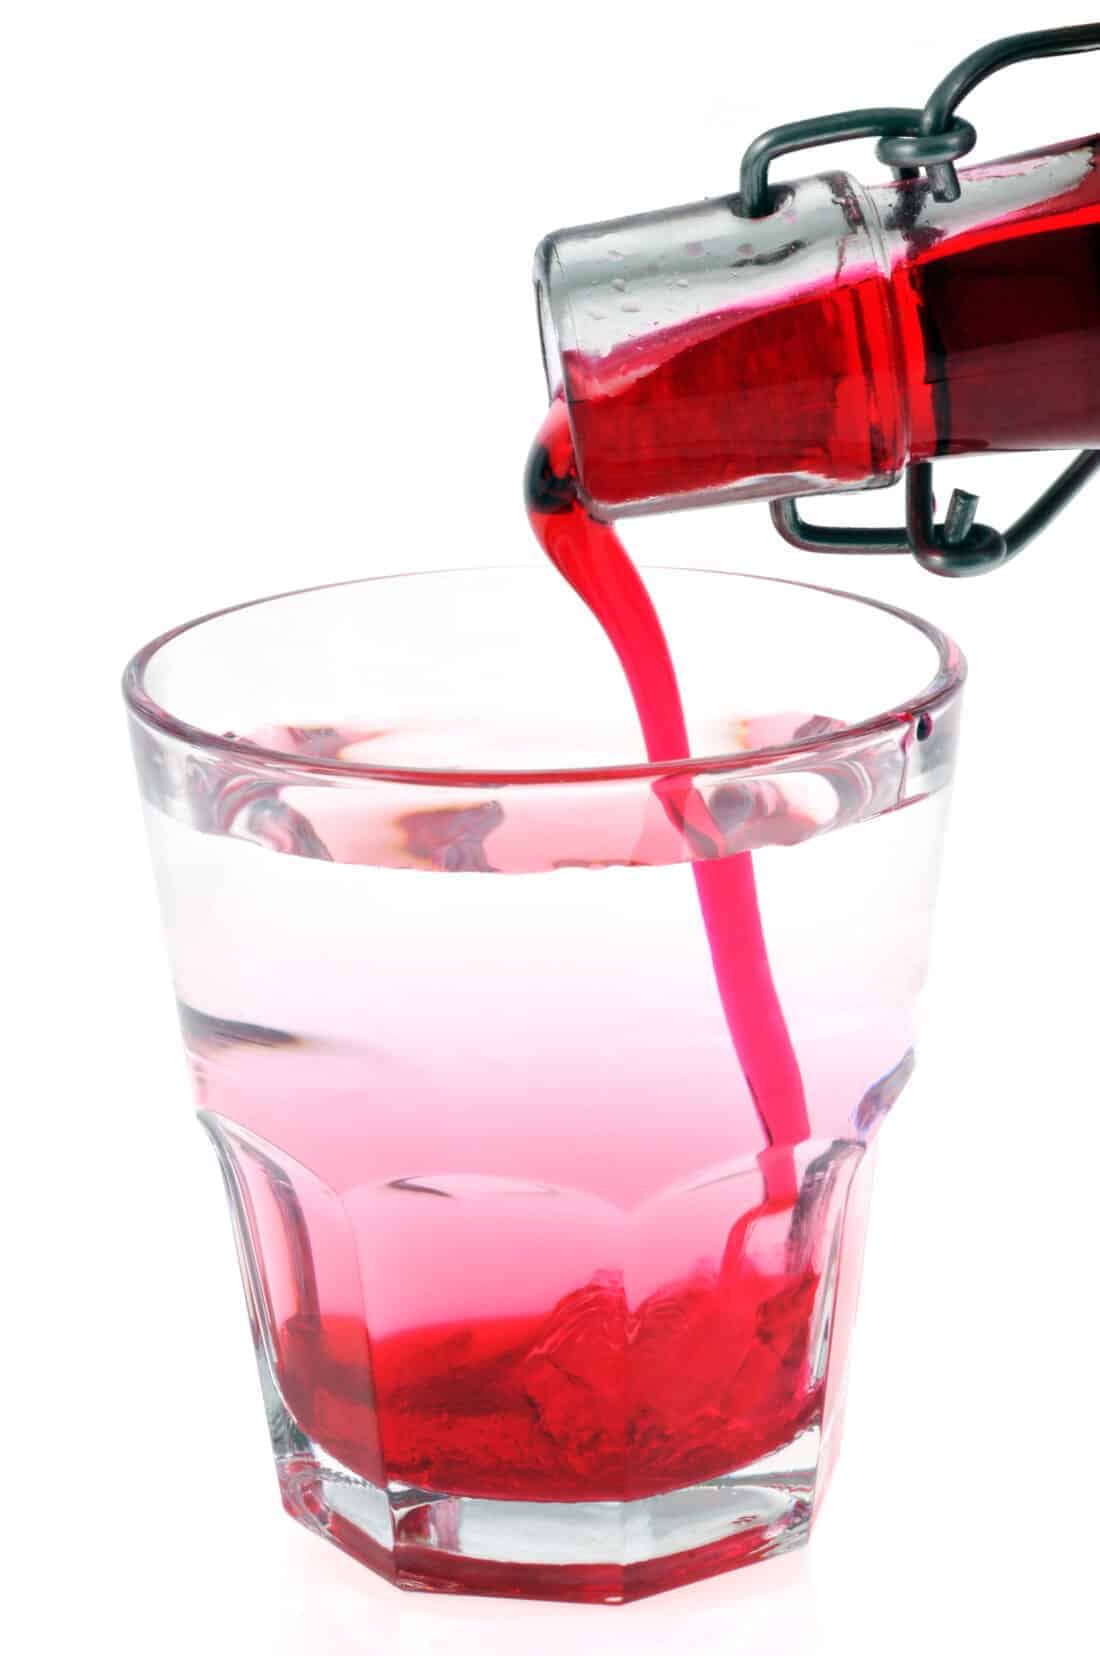 adding pomegranate juice mixed on a glass with sugar and water for homemade grenadine